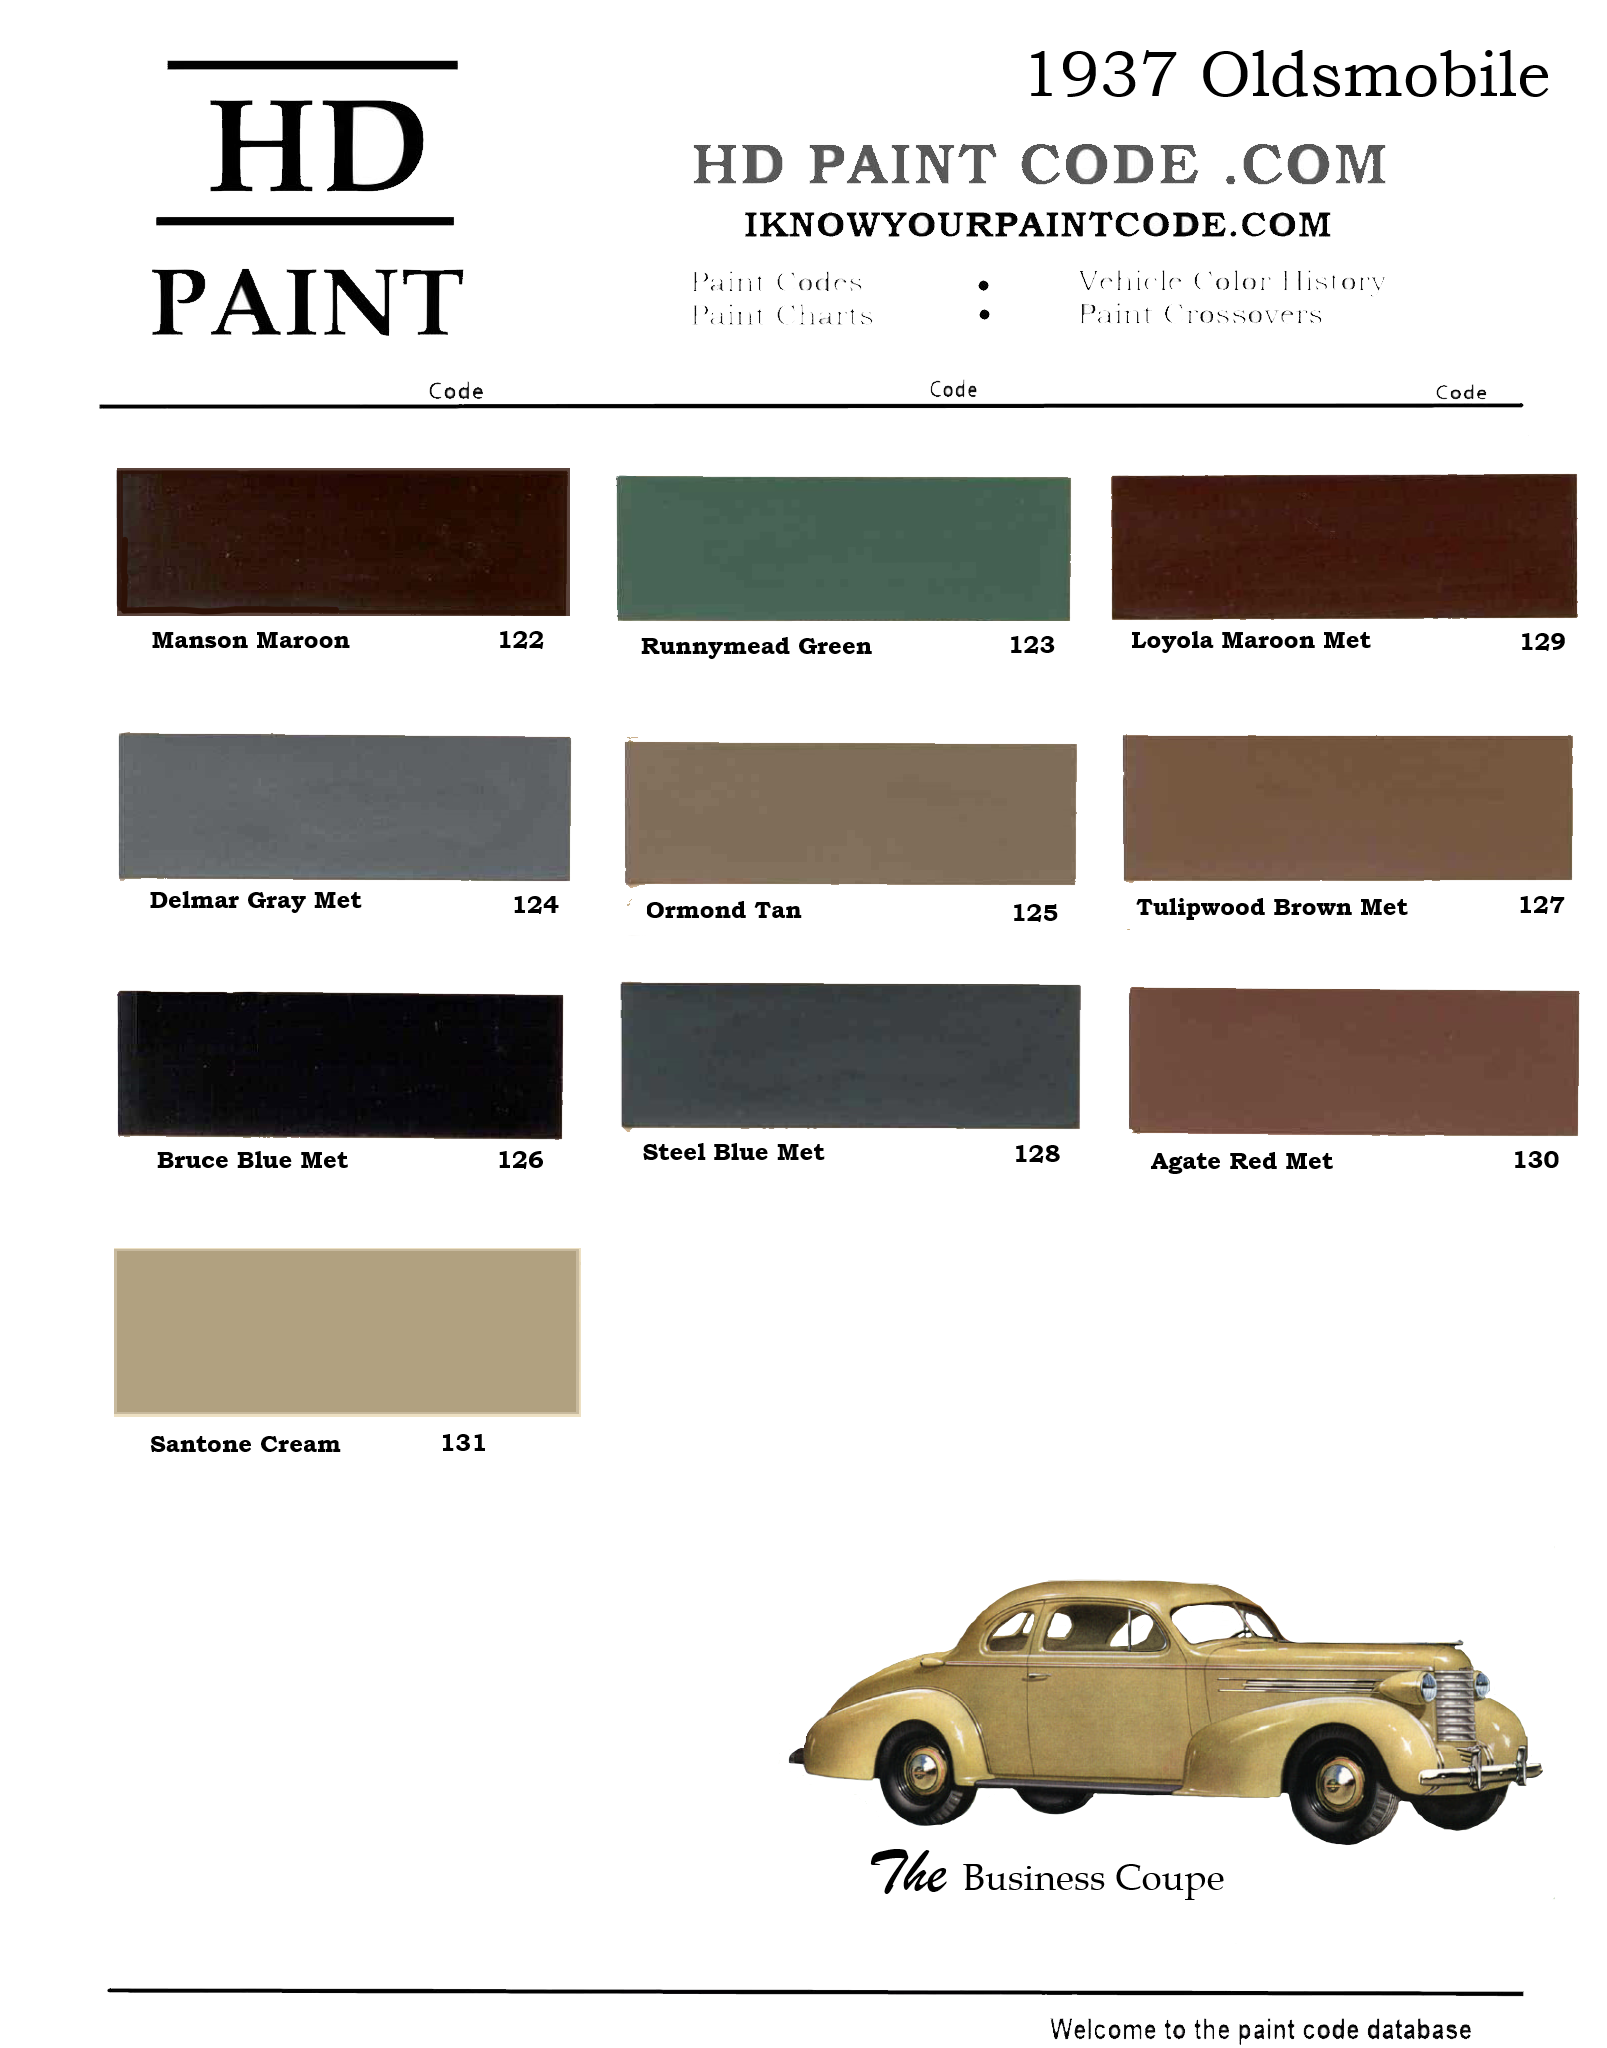 Colors and the lookup codes for 1937 oldsmobile Models